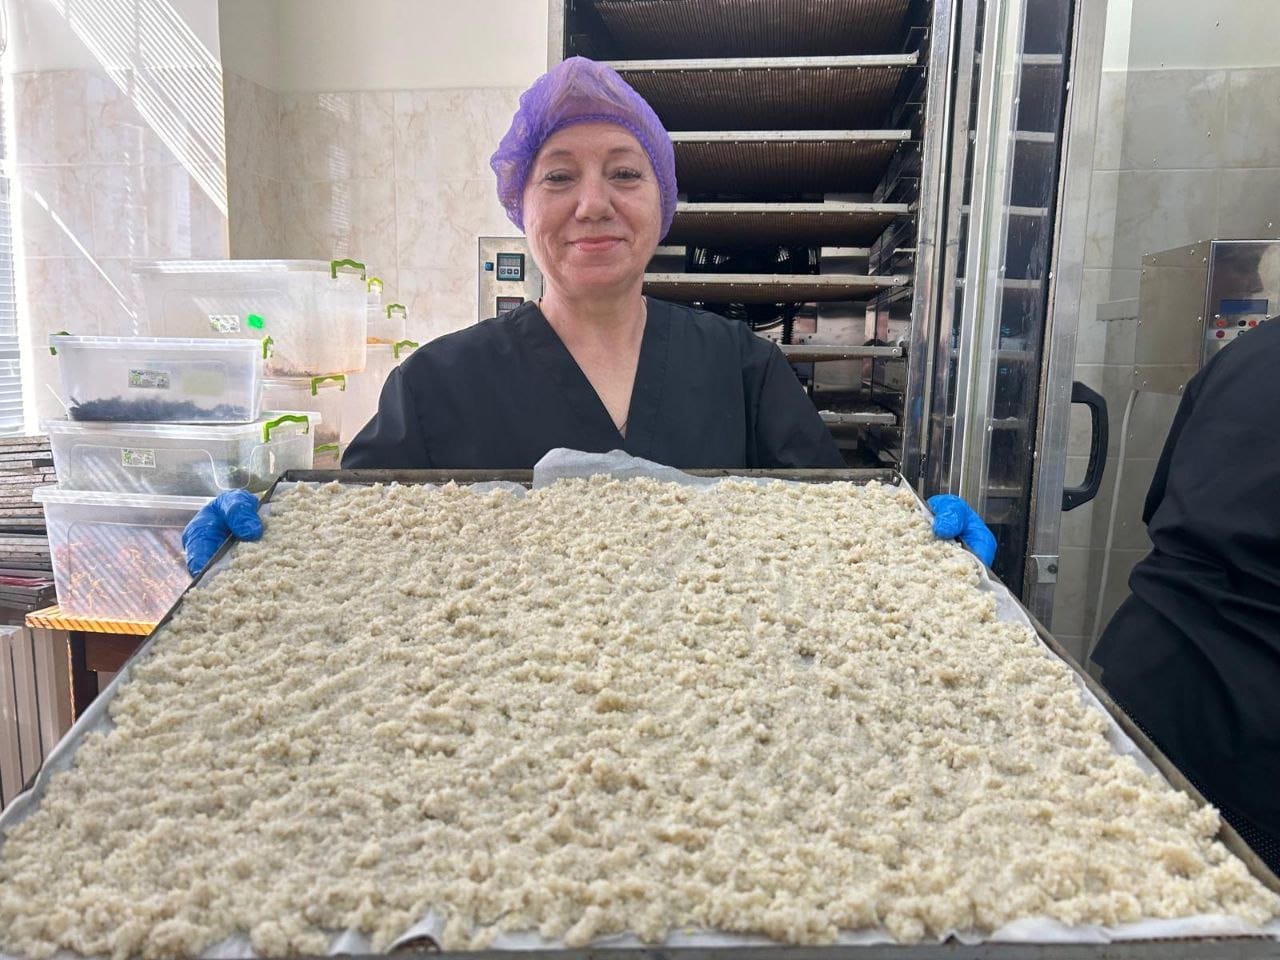 A person wearing a hairnet and gloves holds a large tray of uncooked shredded material, possibly food, in a kitchen with plastic bins and an industrial oven in the background, preparing for food delivery organized by Ukrainian volunteers.